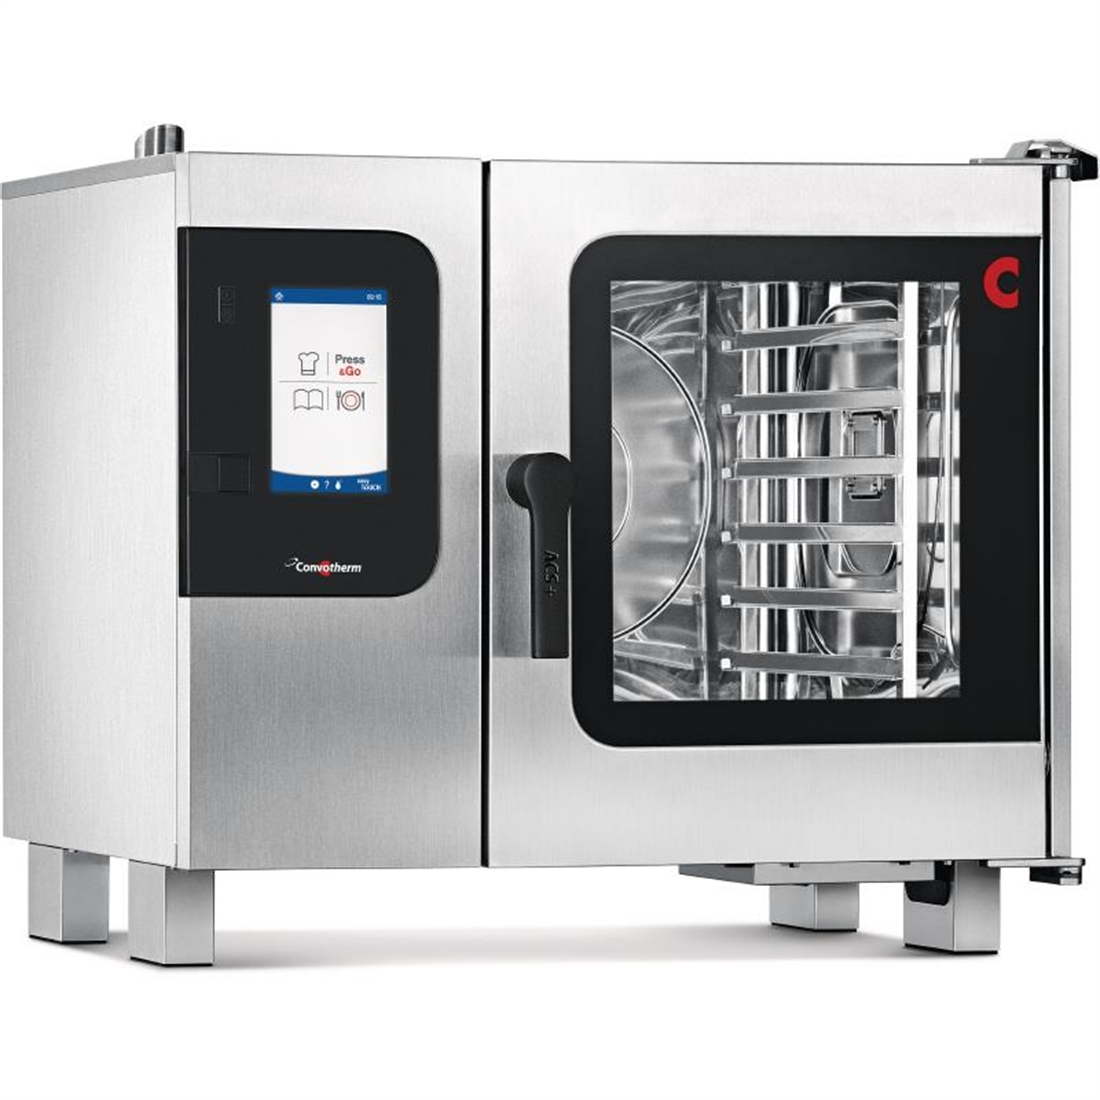 Convotherm 4 easyTouch Combi Oven 6 x 1 x1 GN Grid with Smoker